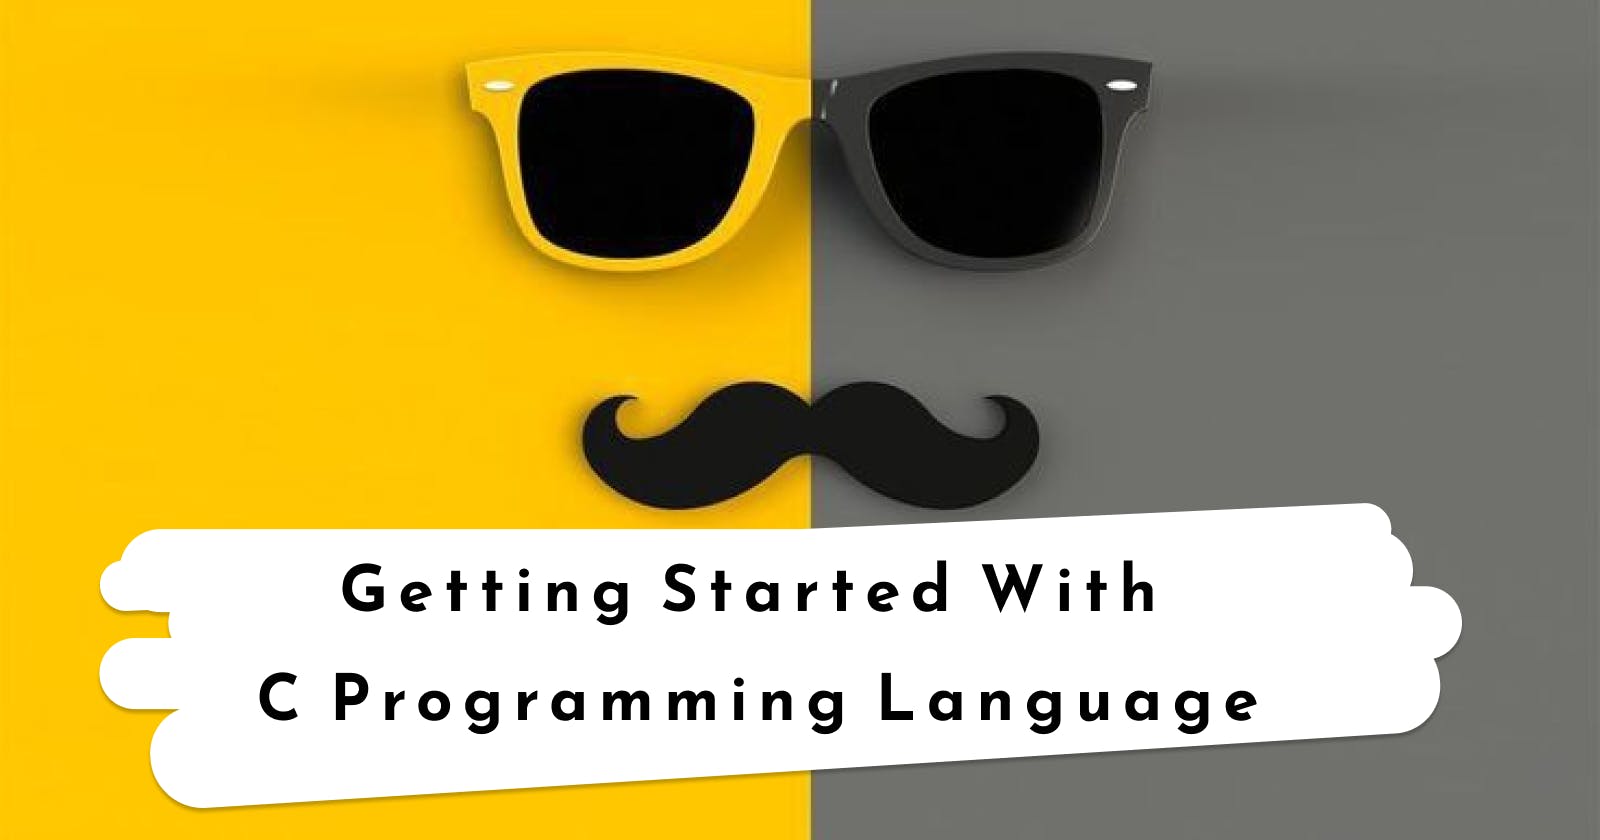 Getting Started With 
C Programming Language